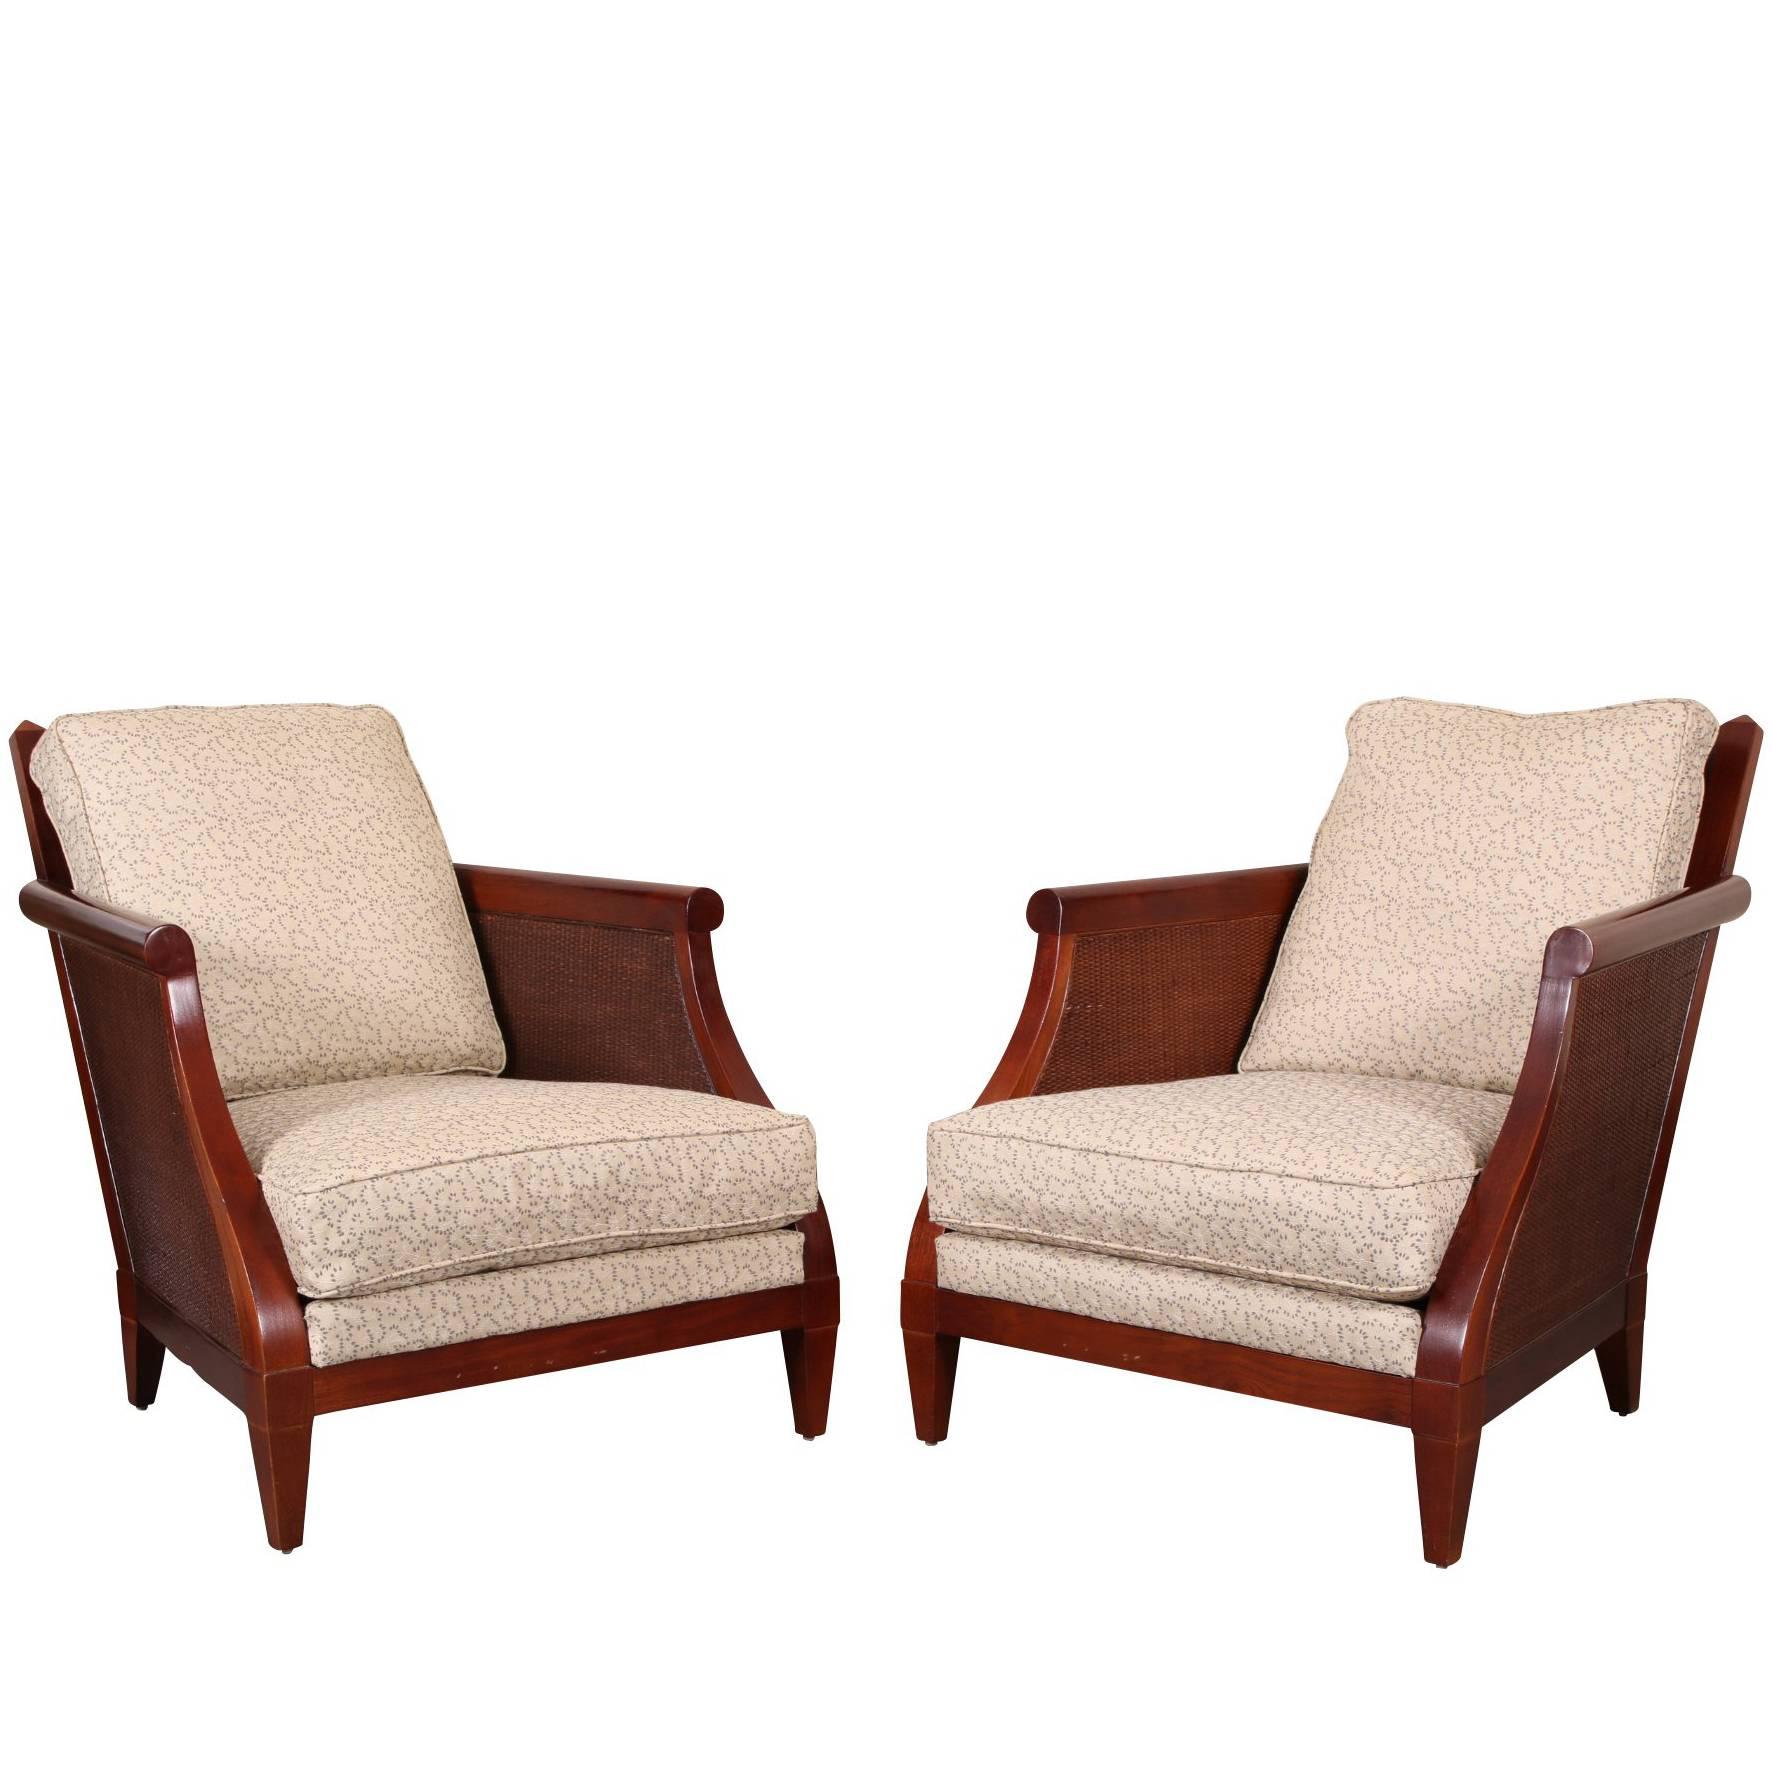 Pair of Holly Hunt for Sutherland Lounge Chairs